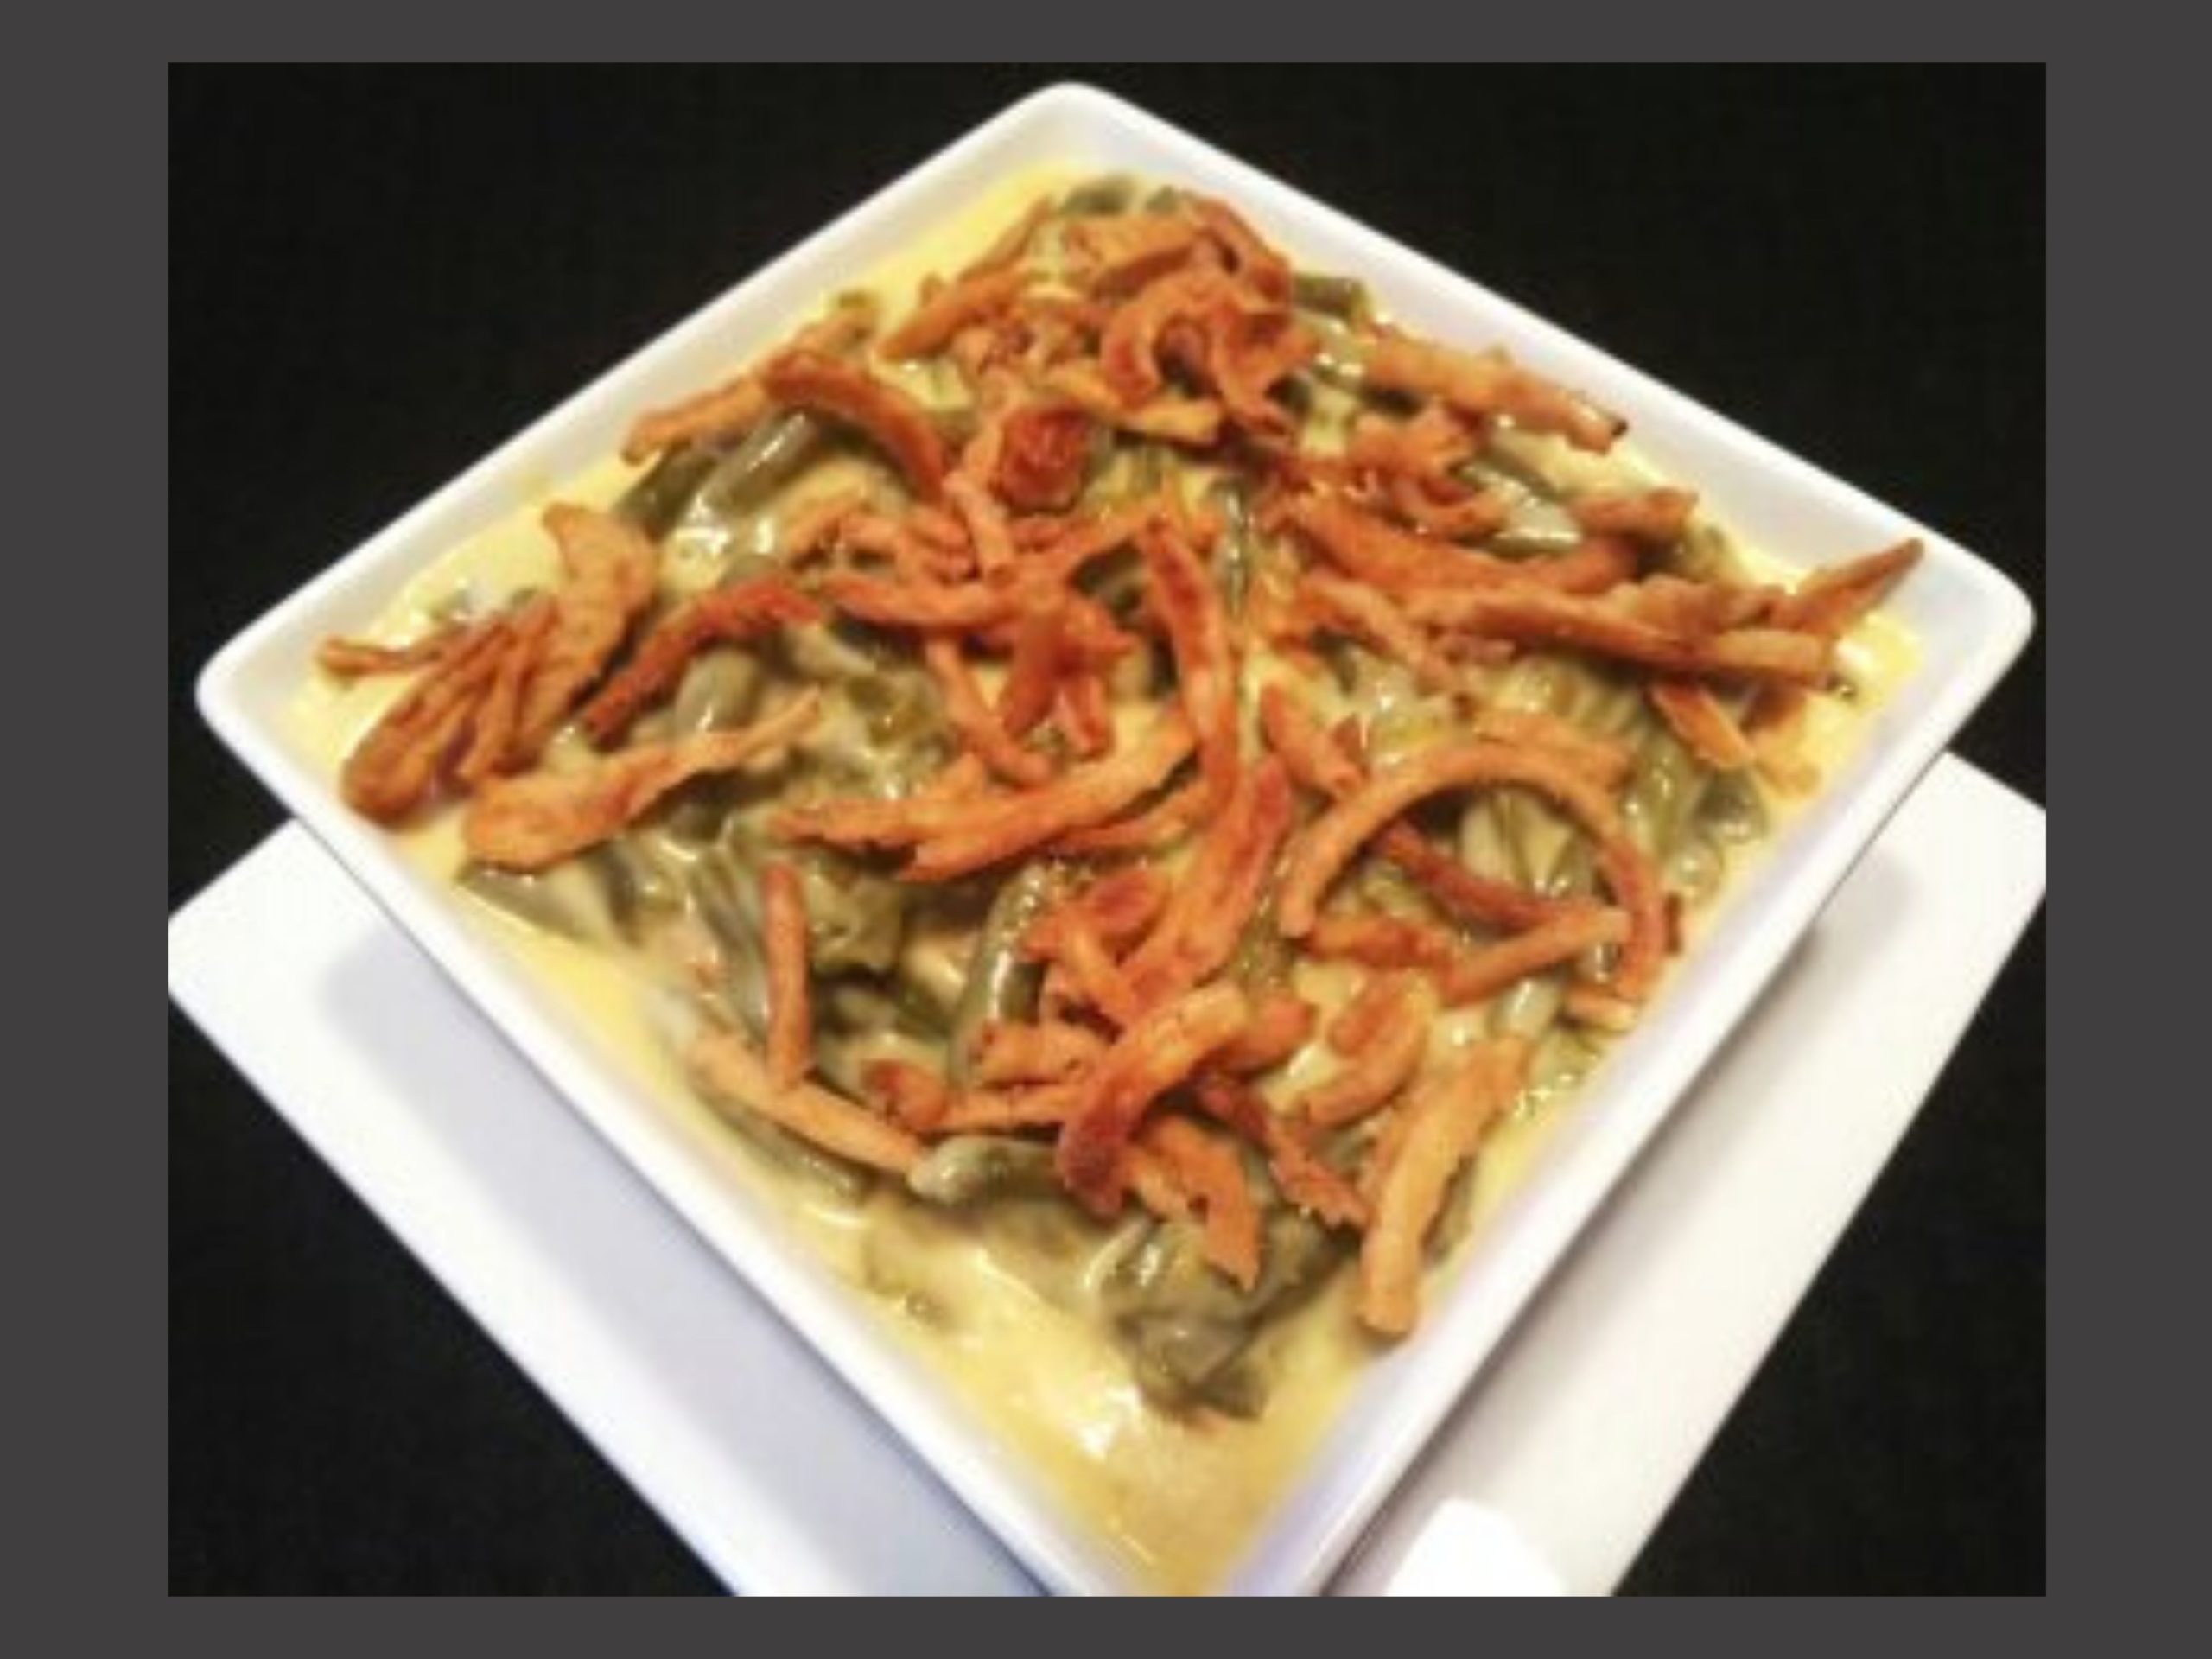 A square white bowl filled with green bean casserole.